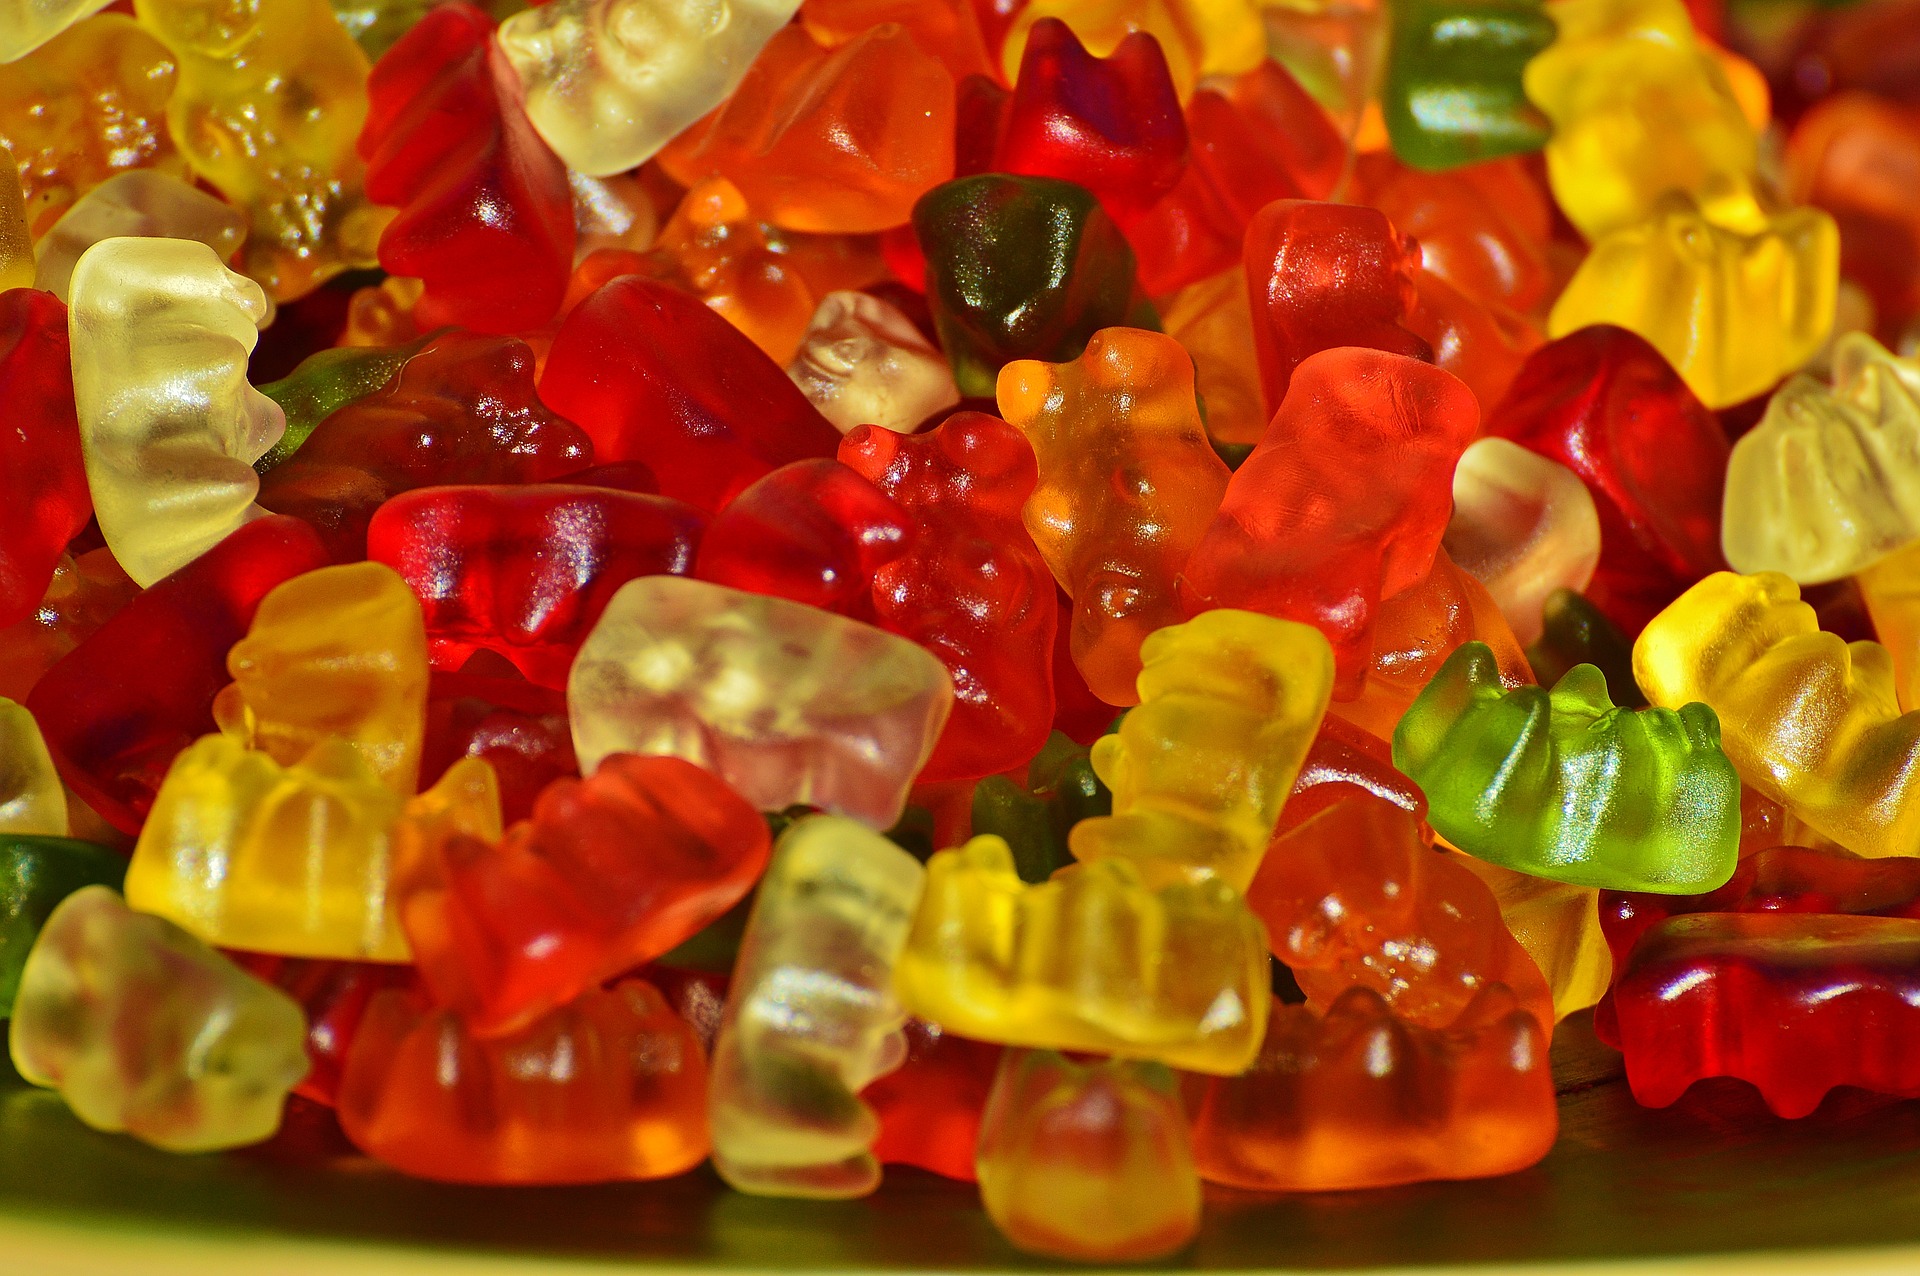 Gummy Bear Sugar Free Review: How Much Is It Okay to Have?